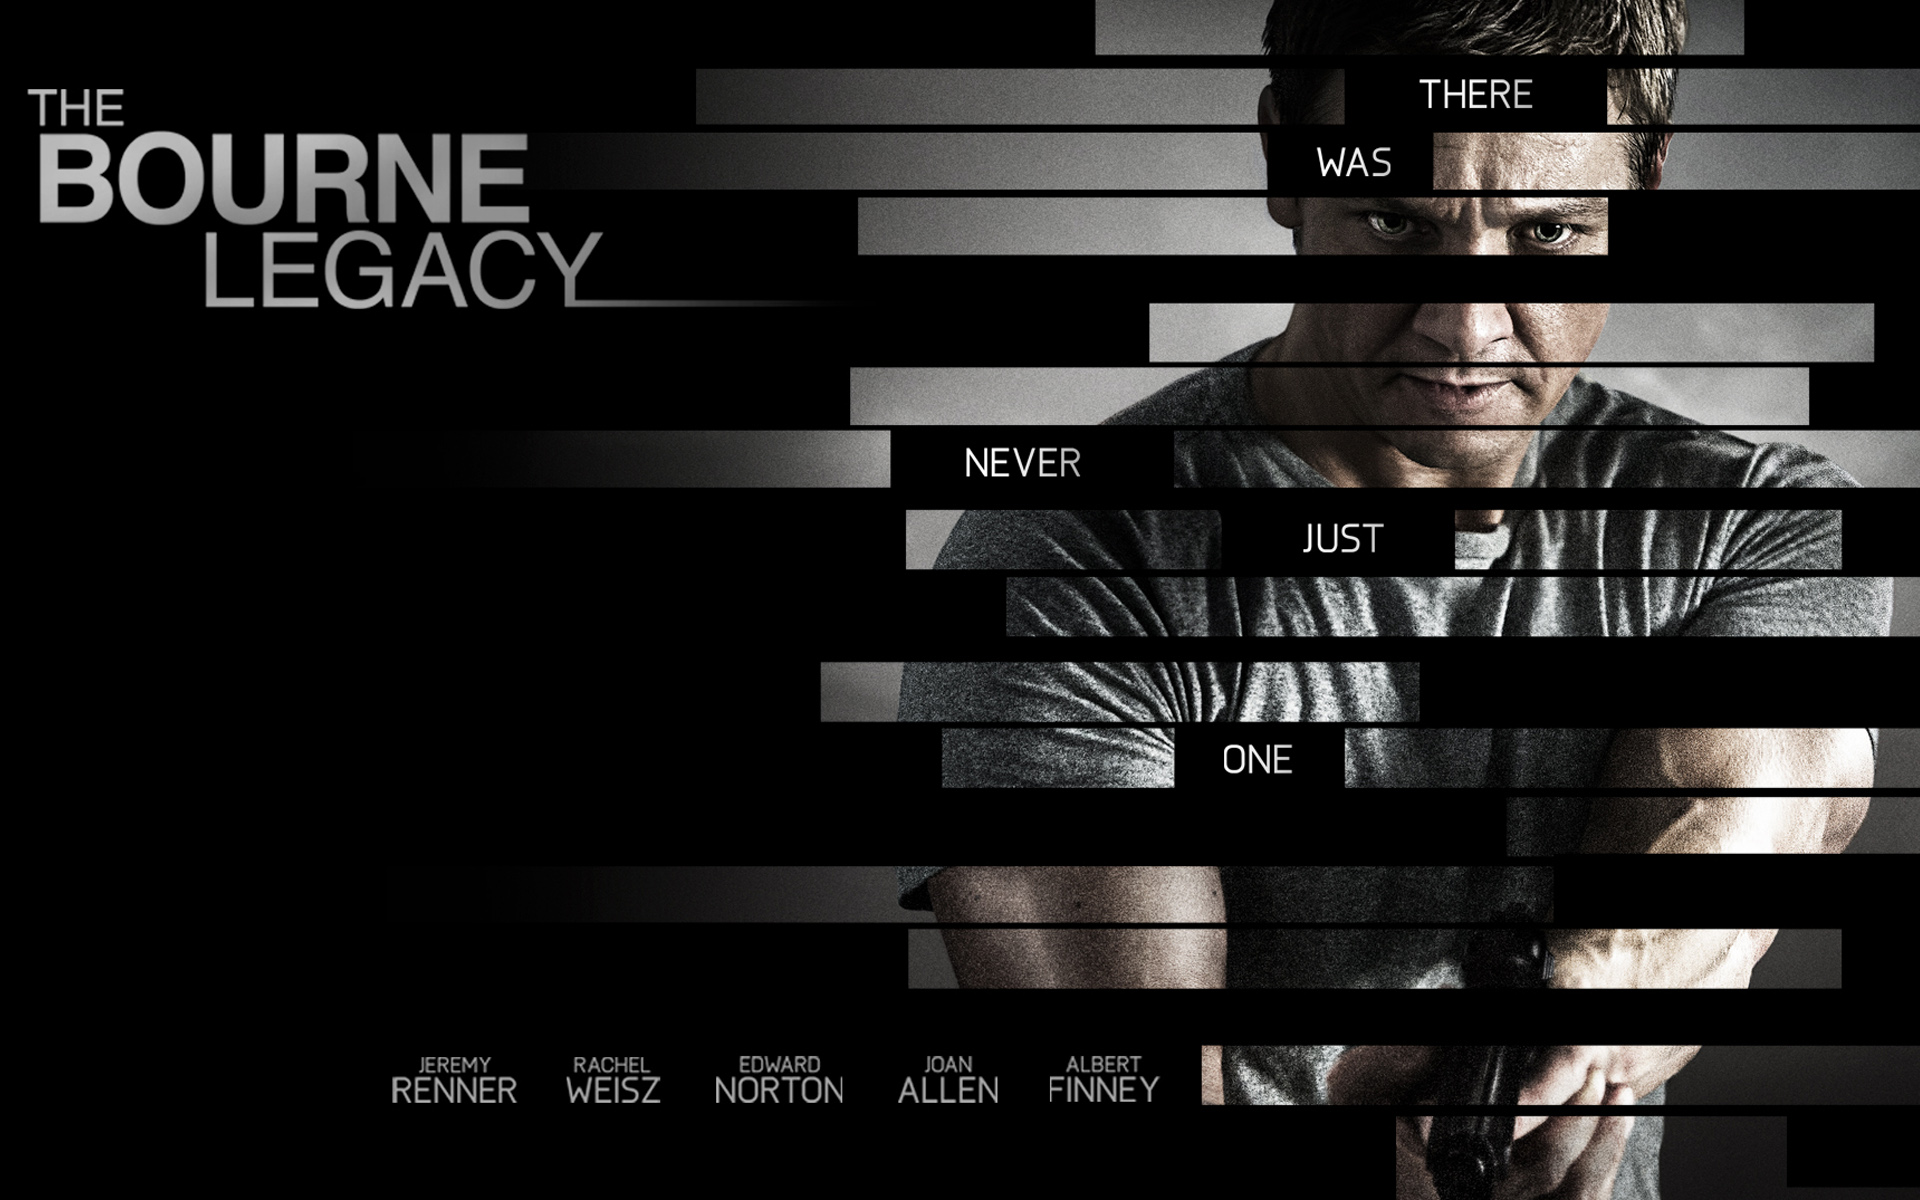 Bourne 4K wallpaper for your desktop or mobile screen free and easy to download